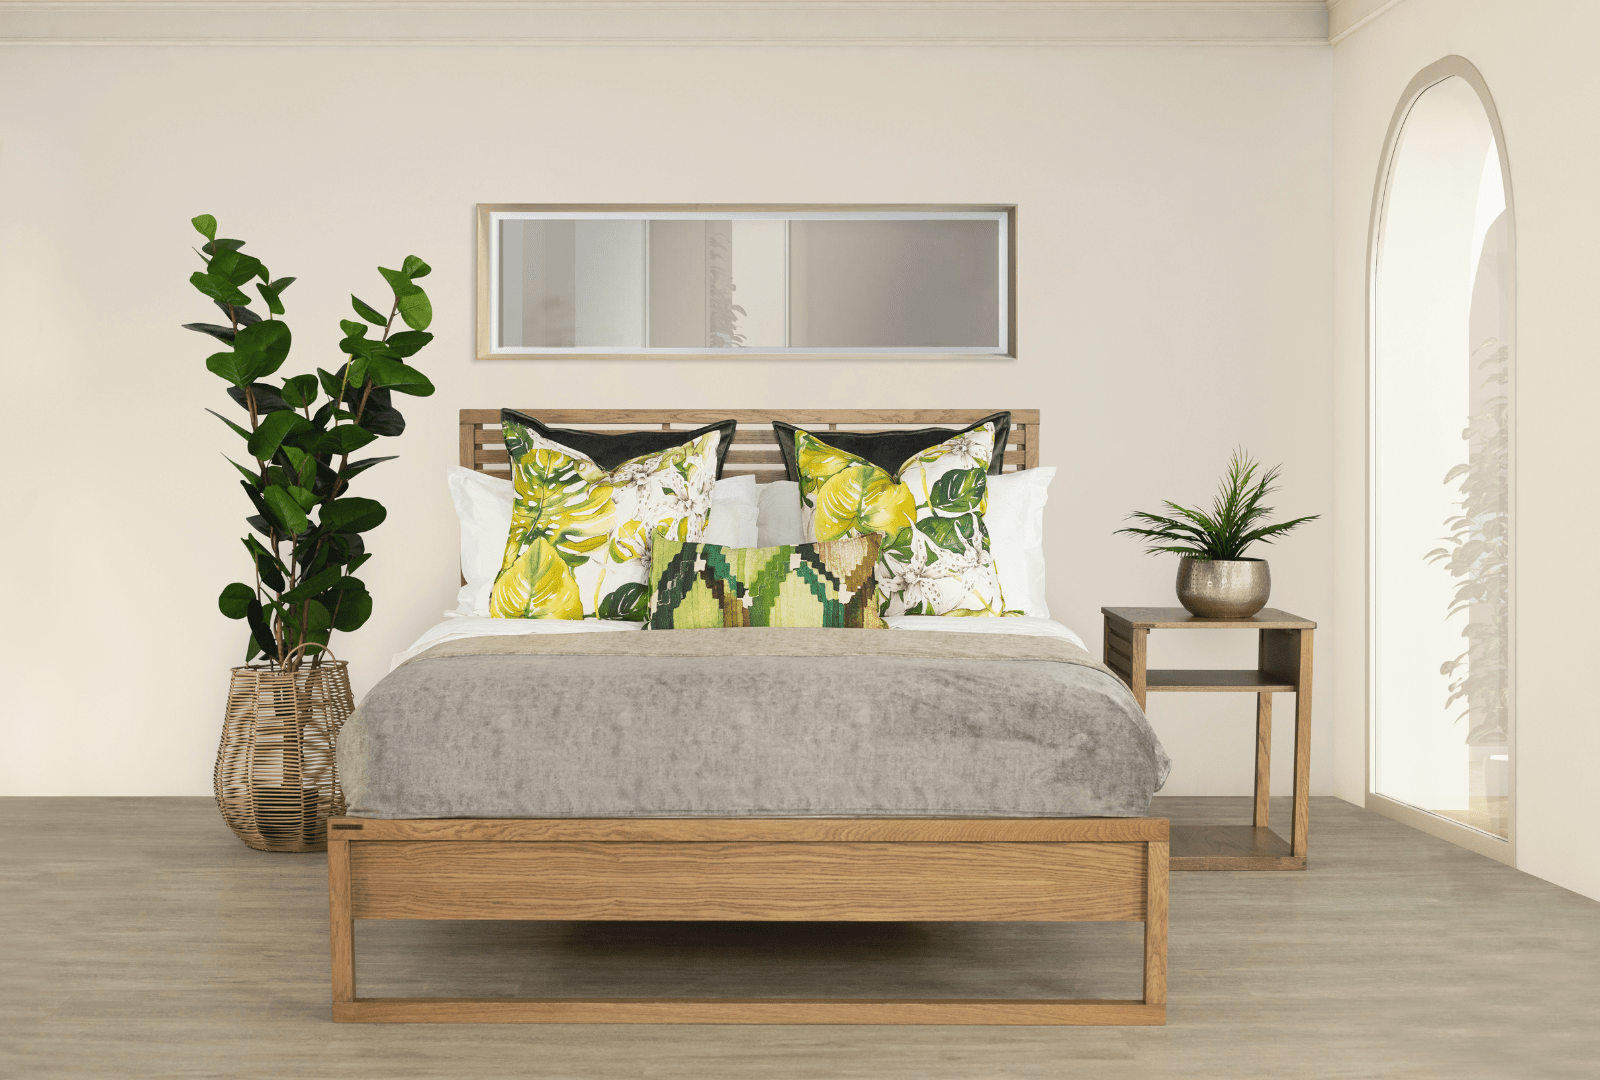 Designing the Perfect Restful Sanctuary: A Guide to Bedframe Styles and Décor